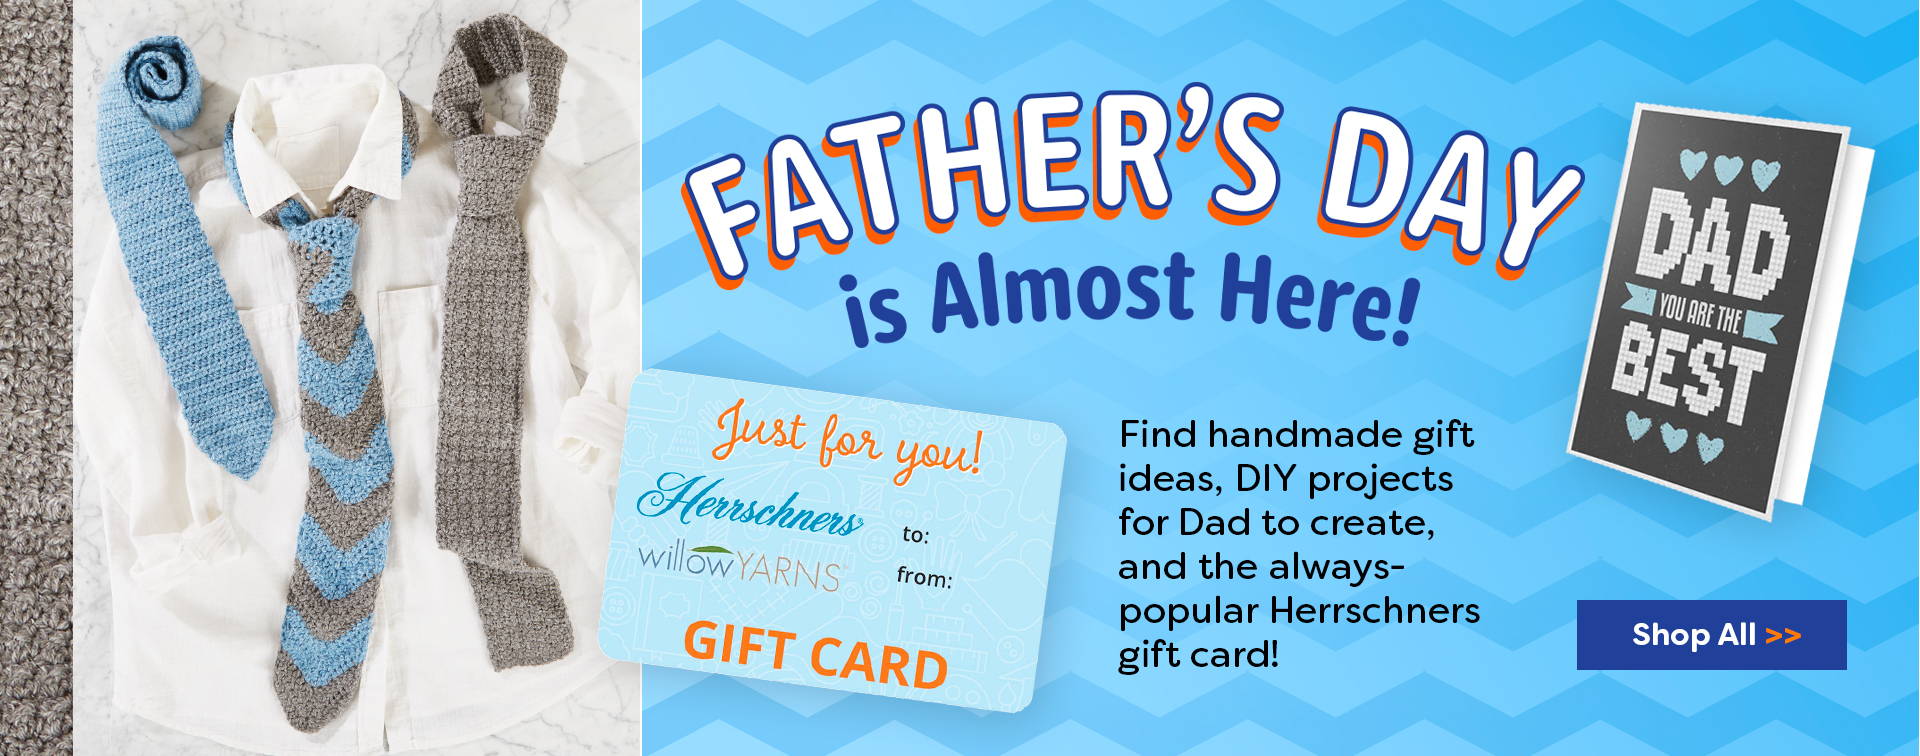 Father’s Day is Almost Here! Find handmade gift ideas, DIY projects for Dad to create, and the always-popular Herrschners gift card! 